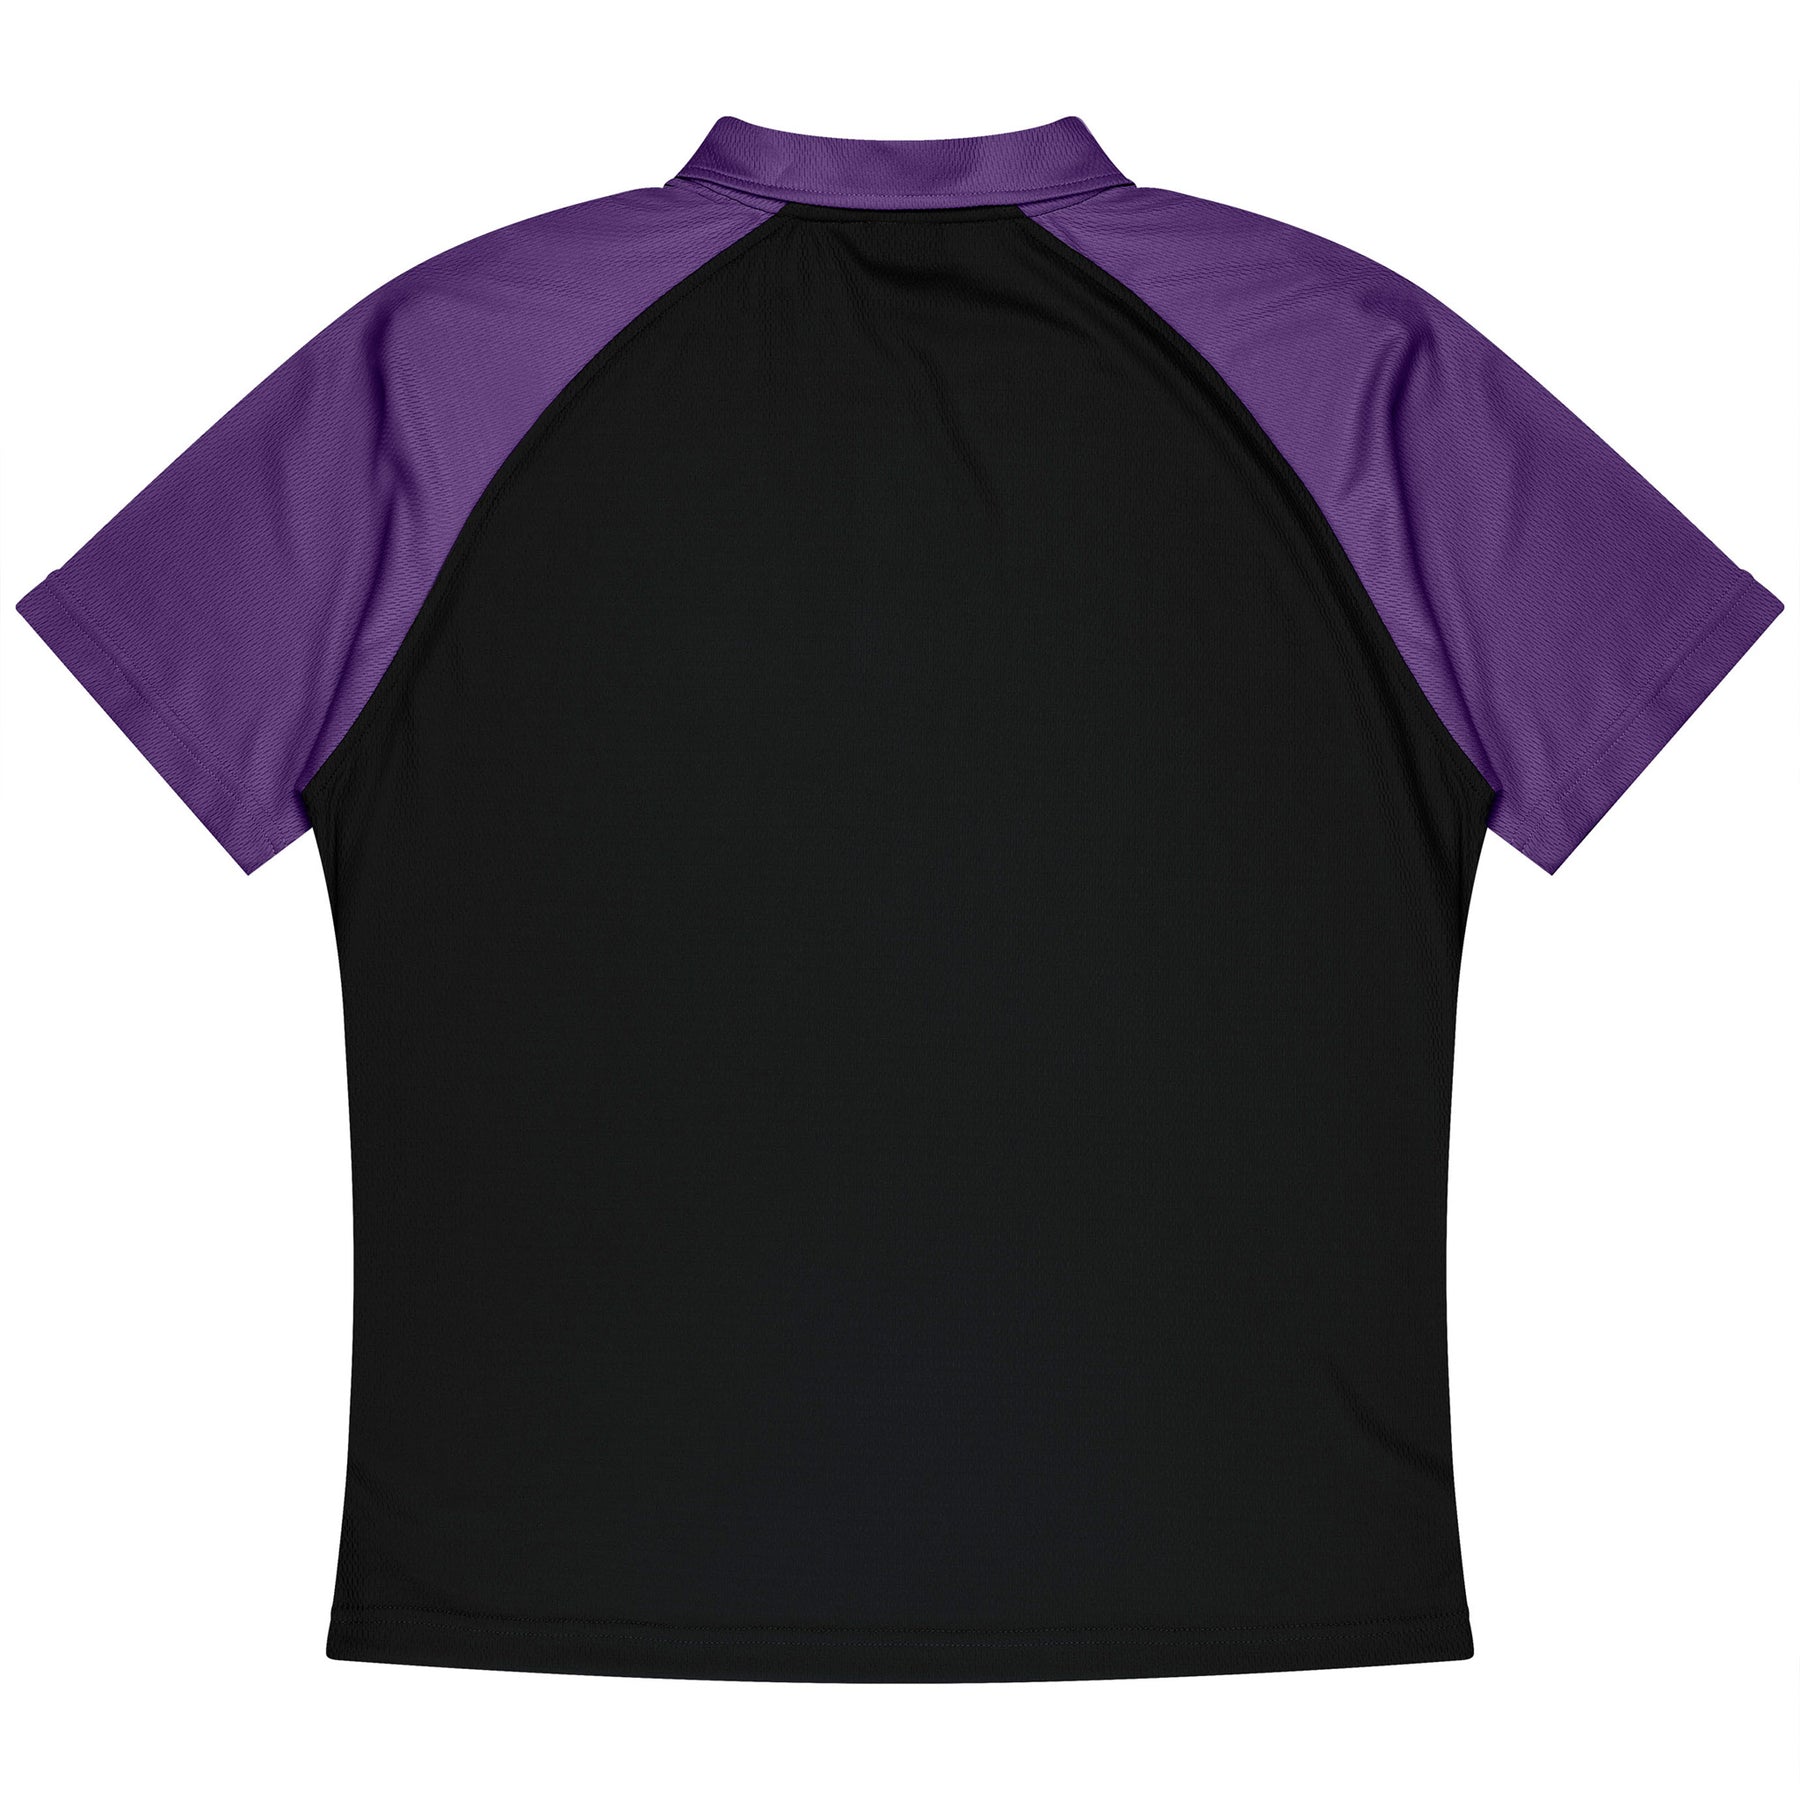 aussie pacific manly mens polo in black electric purple